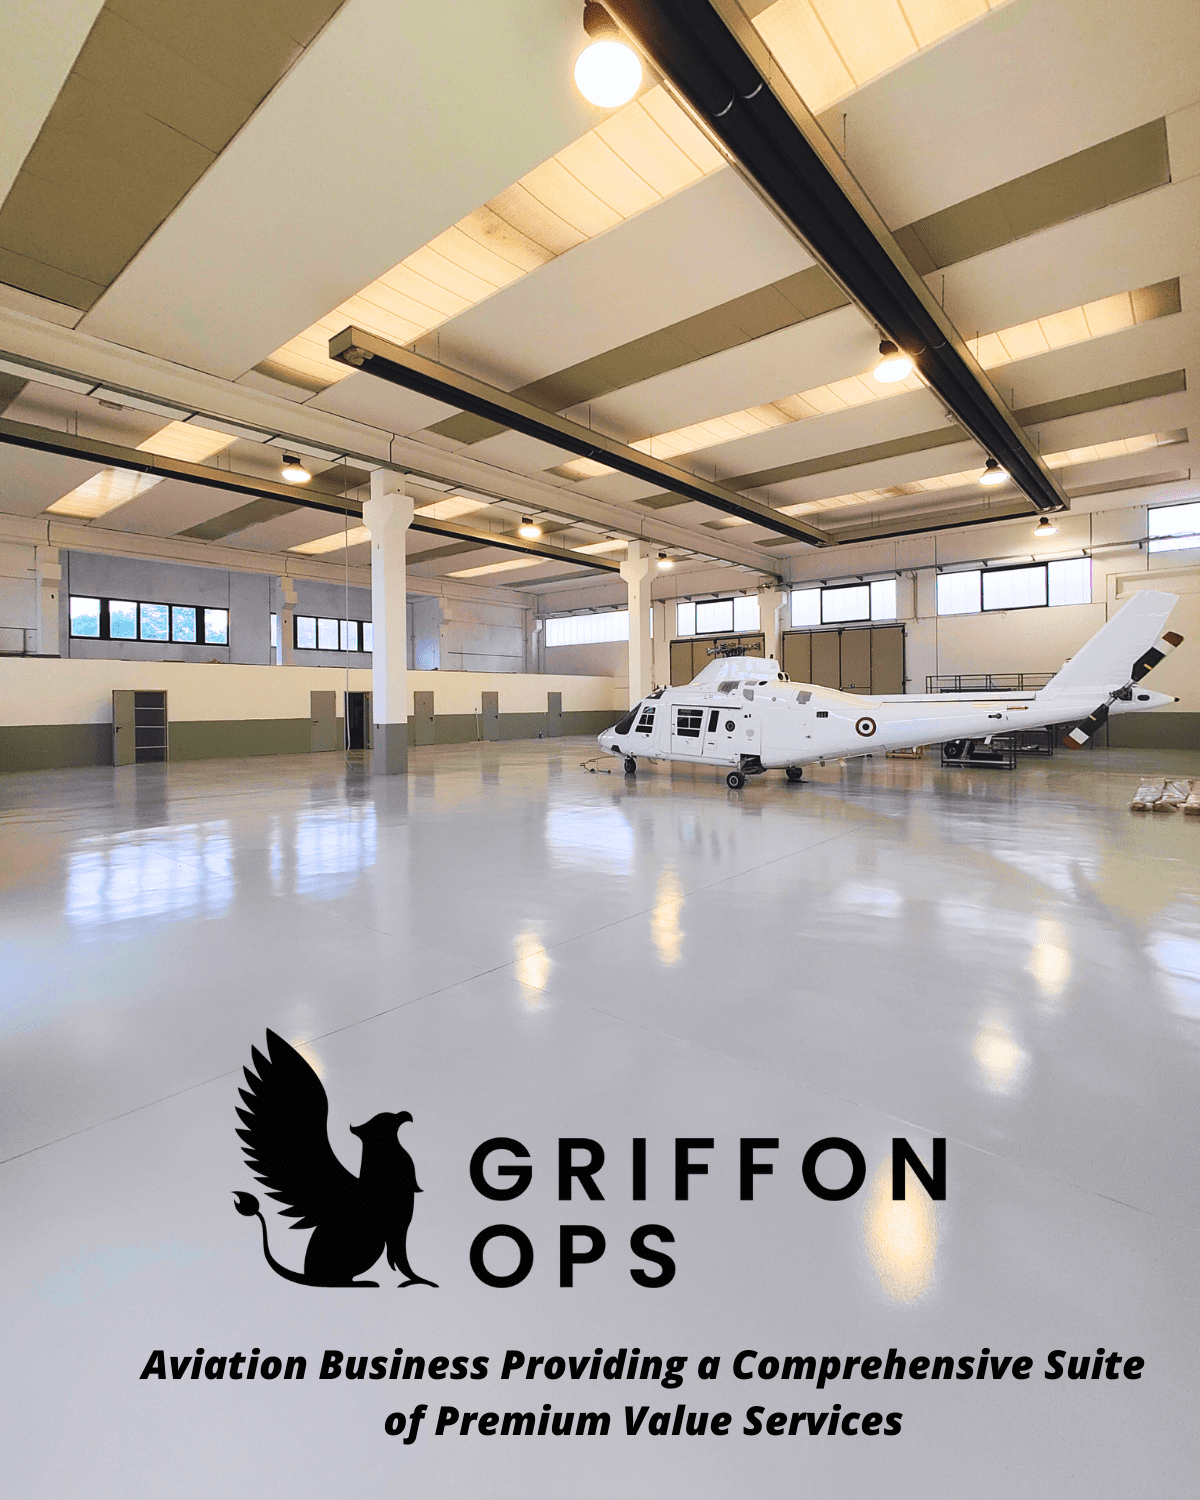 Griffon Ops new facility and AW109 - 1